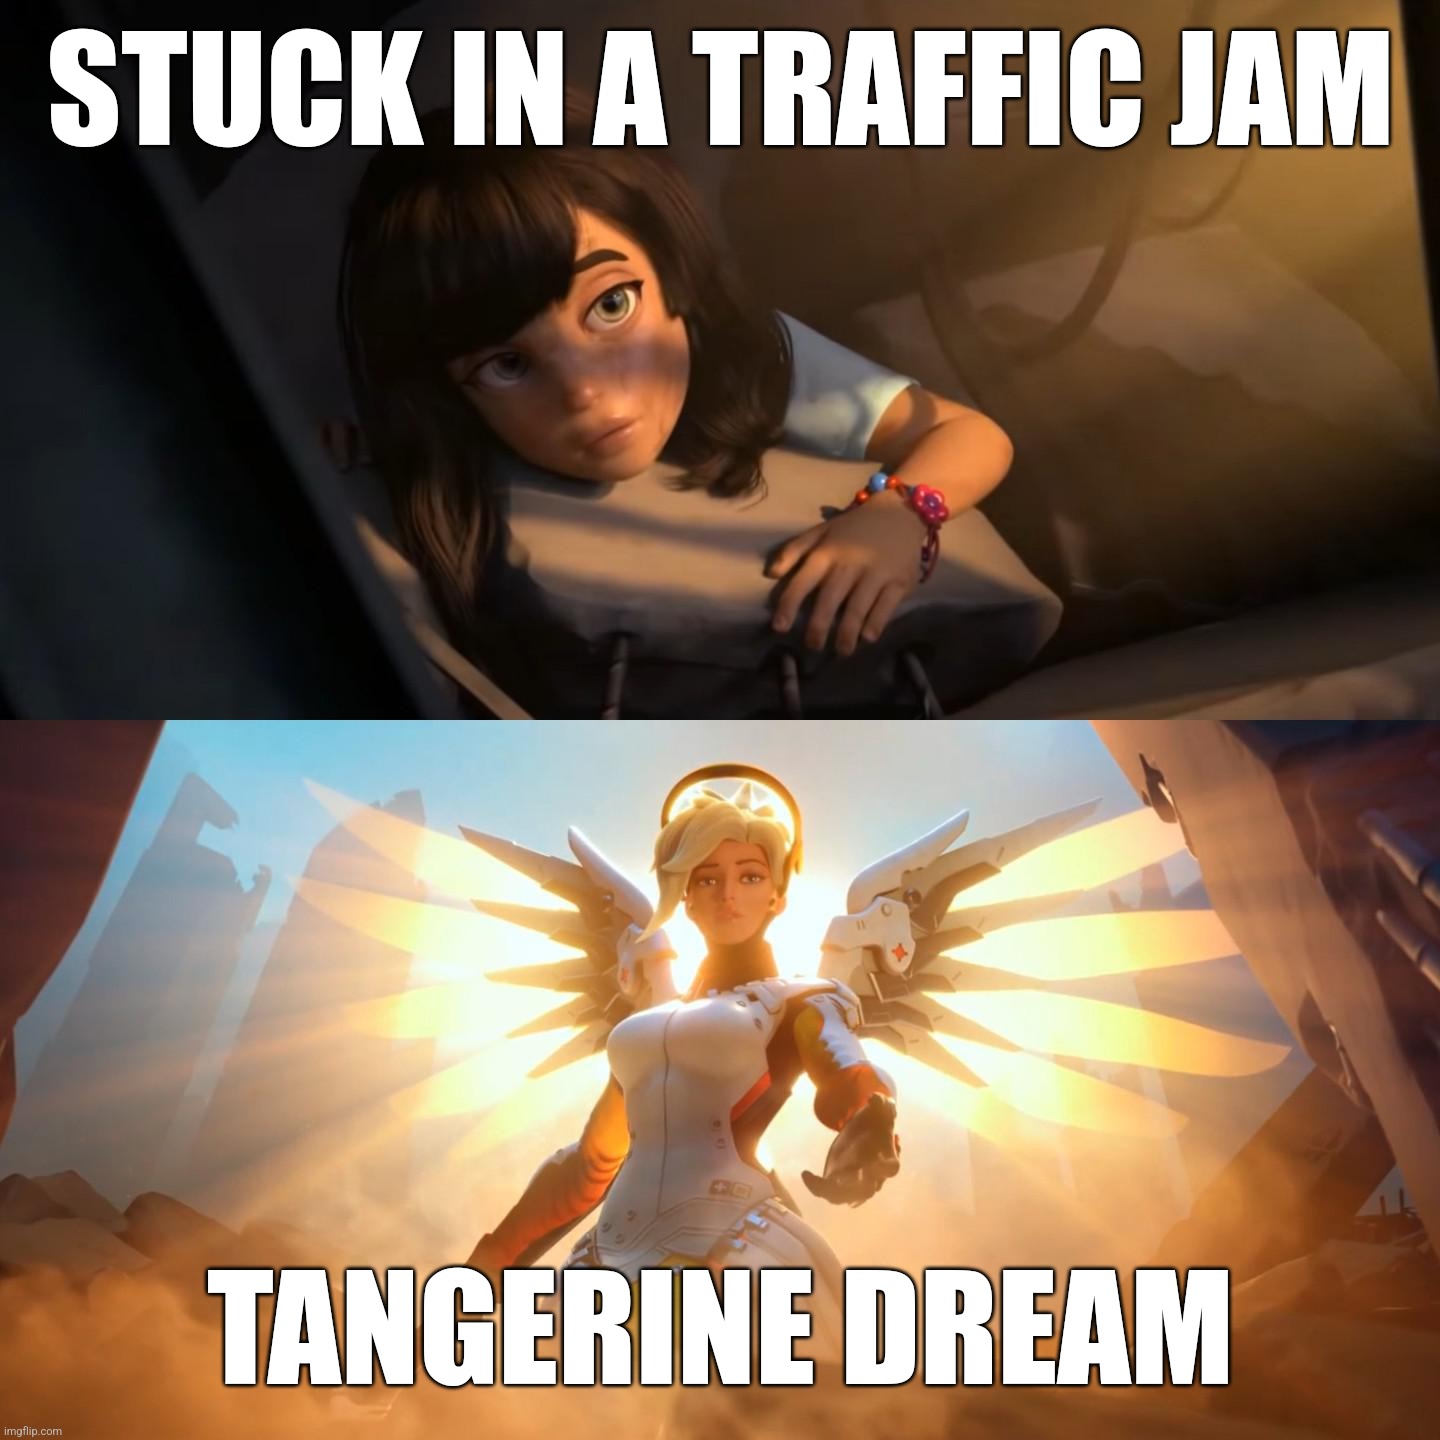 No WC though | STUCK IN A TRAFFIC JAM; TANGERINE DREAM | image tagged in overwatch mercy meme,overwatch,traffic jam,traffic,music,memes | made w/ Imgflip meme maker